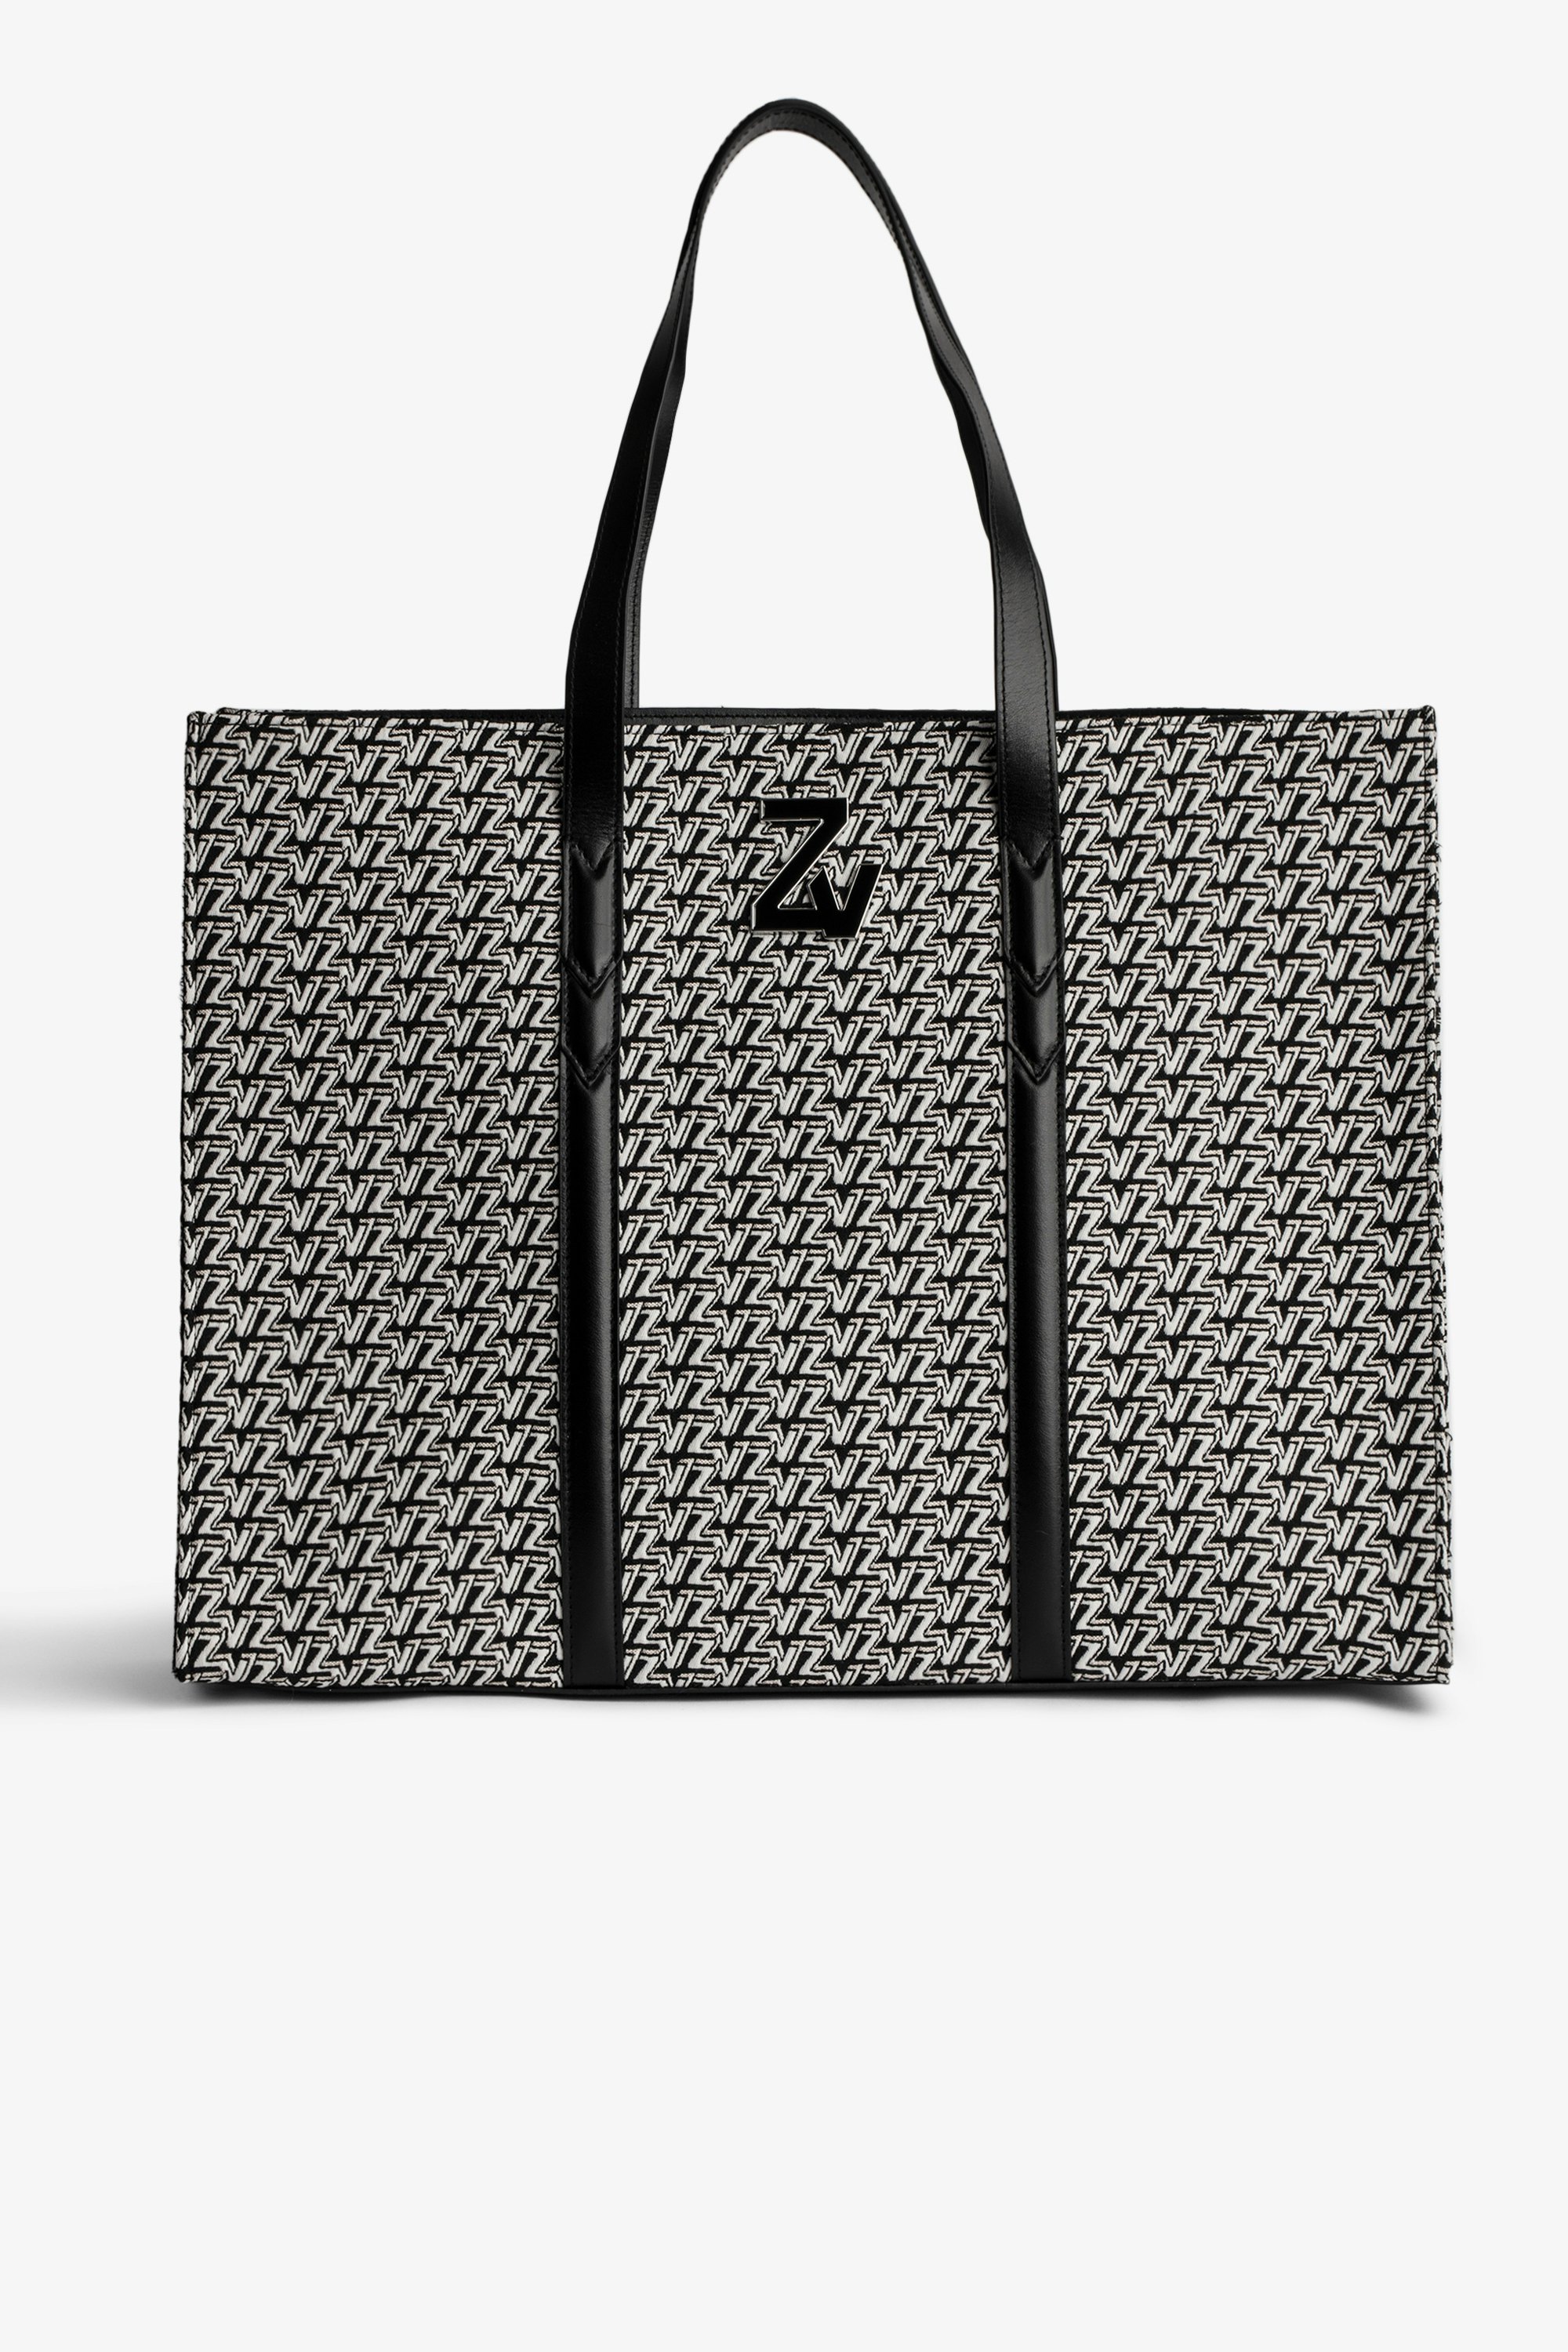 ZV Initiale Le Tote Monogram バッグ Women’s tote bag in black leather and jacquard